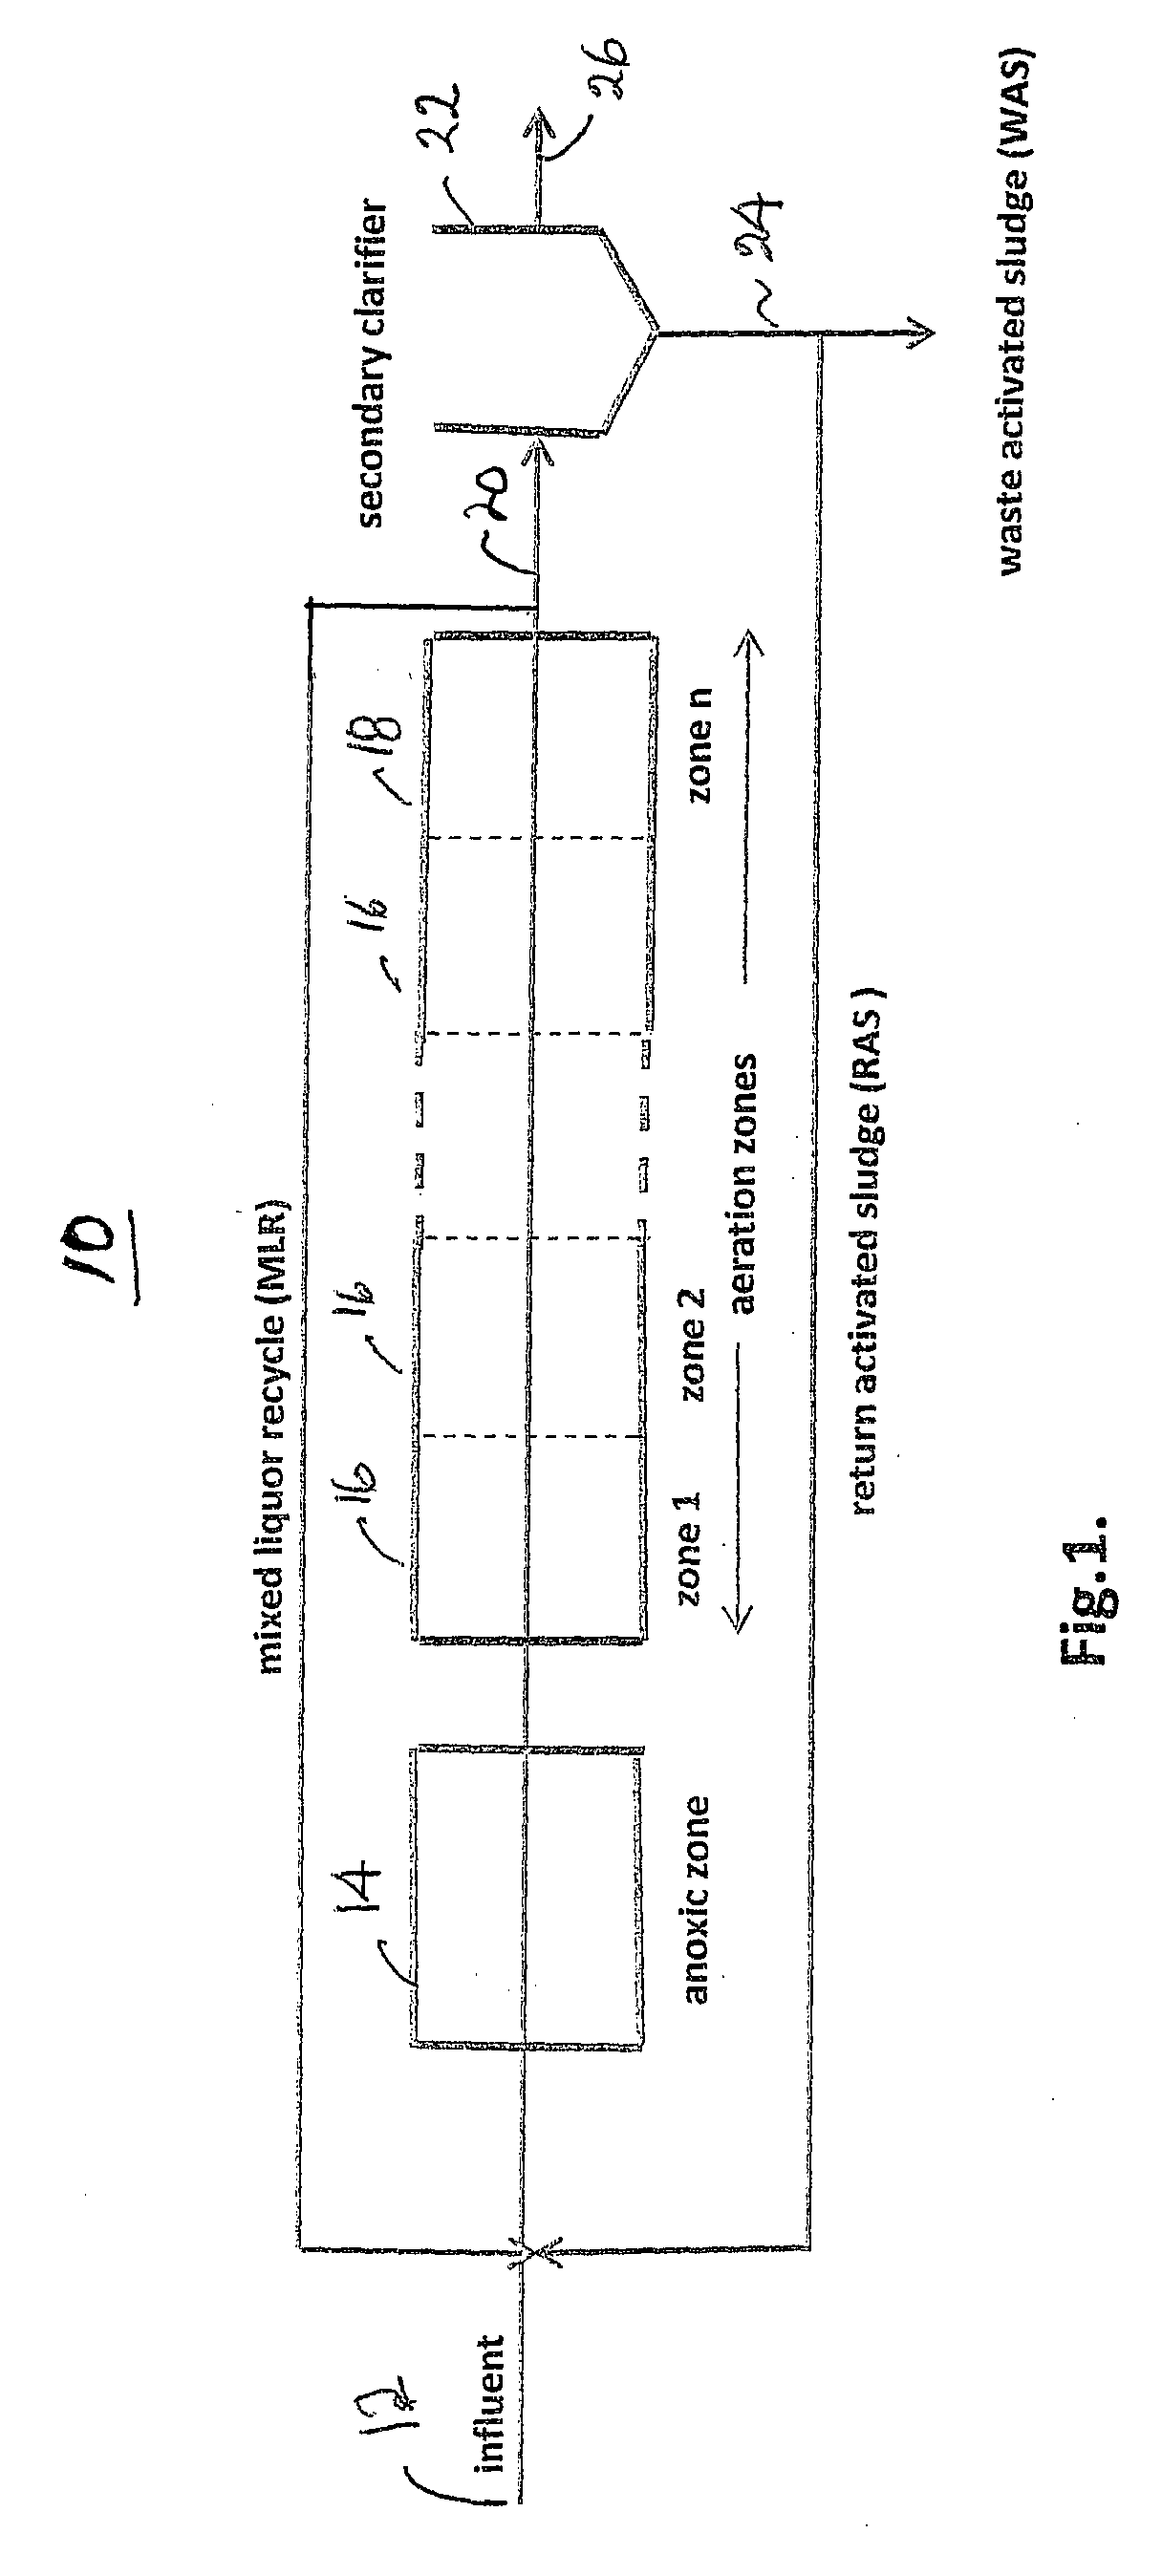 Method and apparatus for monitoring biological activity and controlling aeration in an activated sludge plant